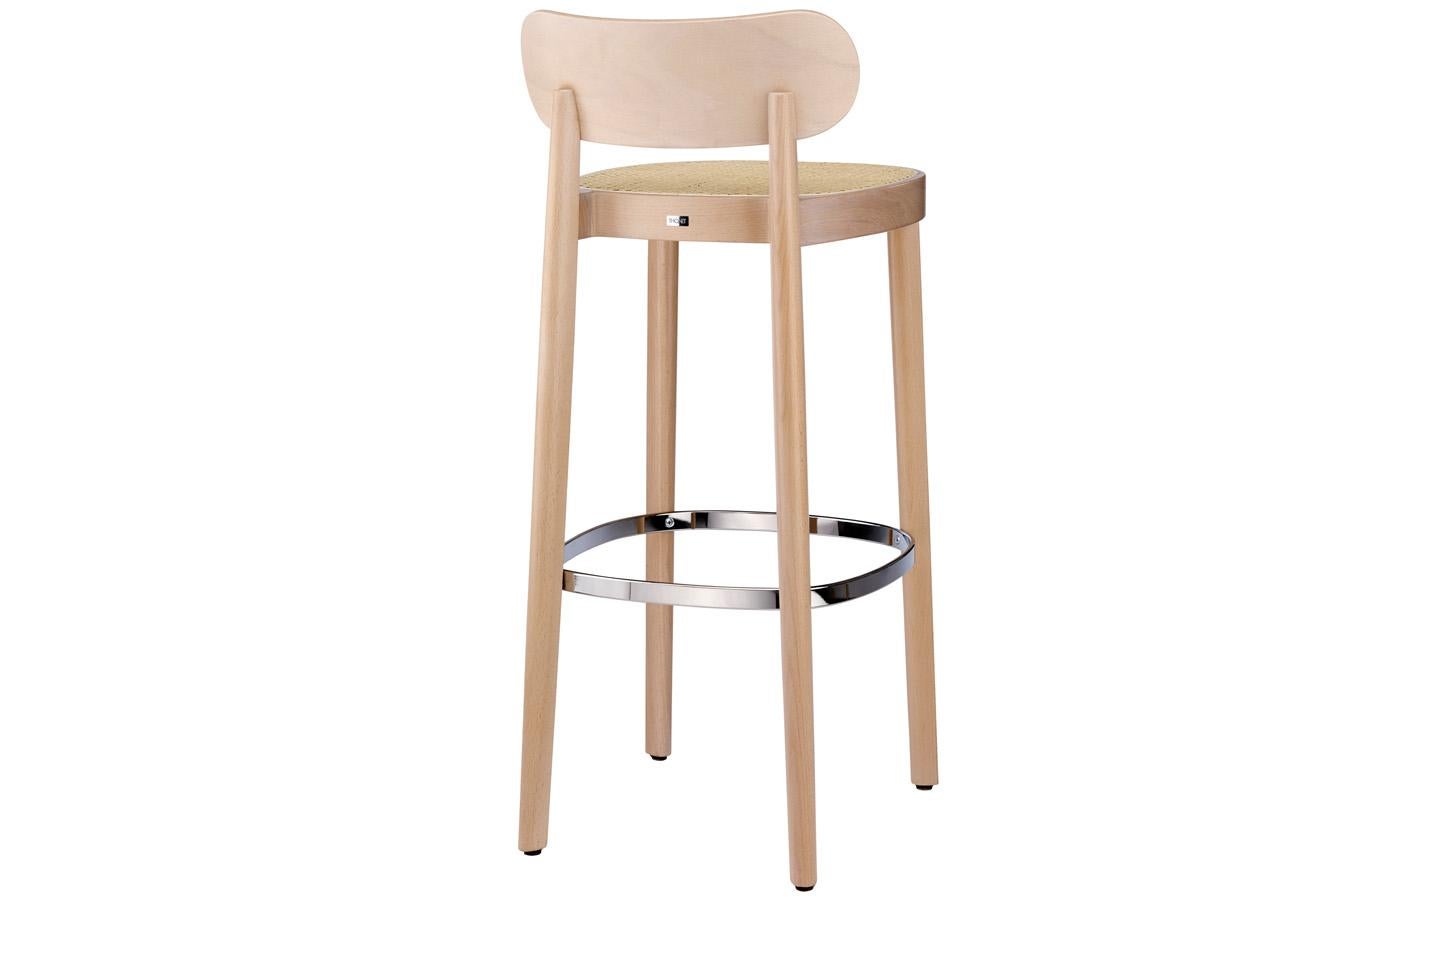 RANGE 118
Minimalistic and honest, at the same time elegant and filigree: chair 118 is a Classic wooden chair that adds subtle elegance to any dining table or restaurant. The principle of reducing a chair to the fewest elements possible was